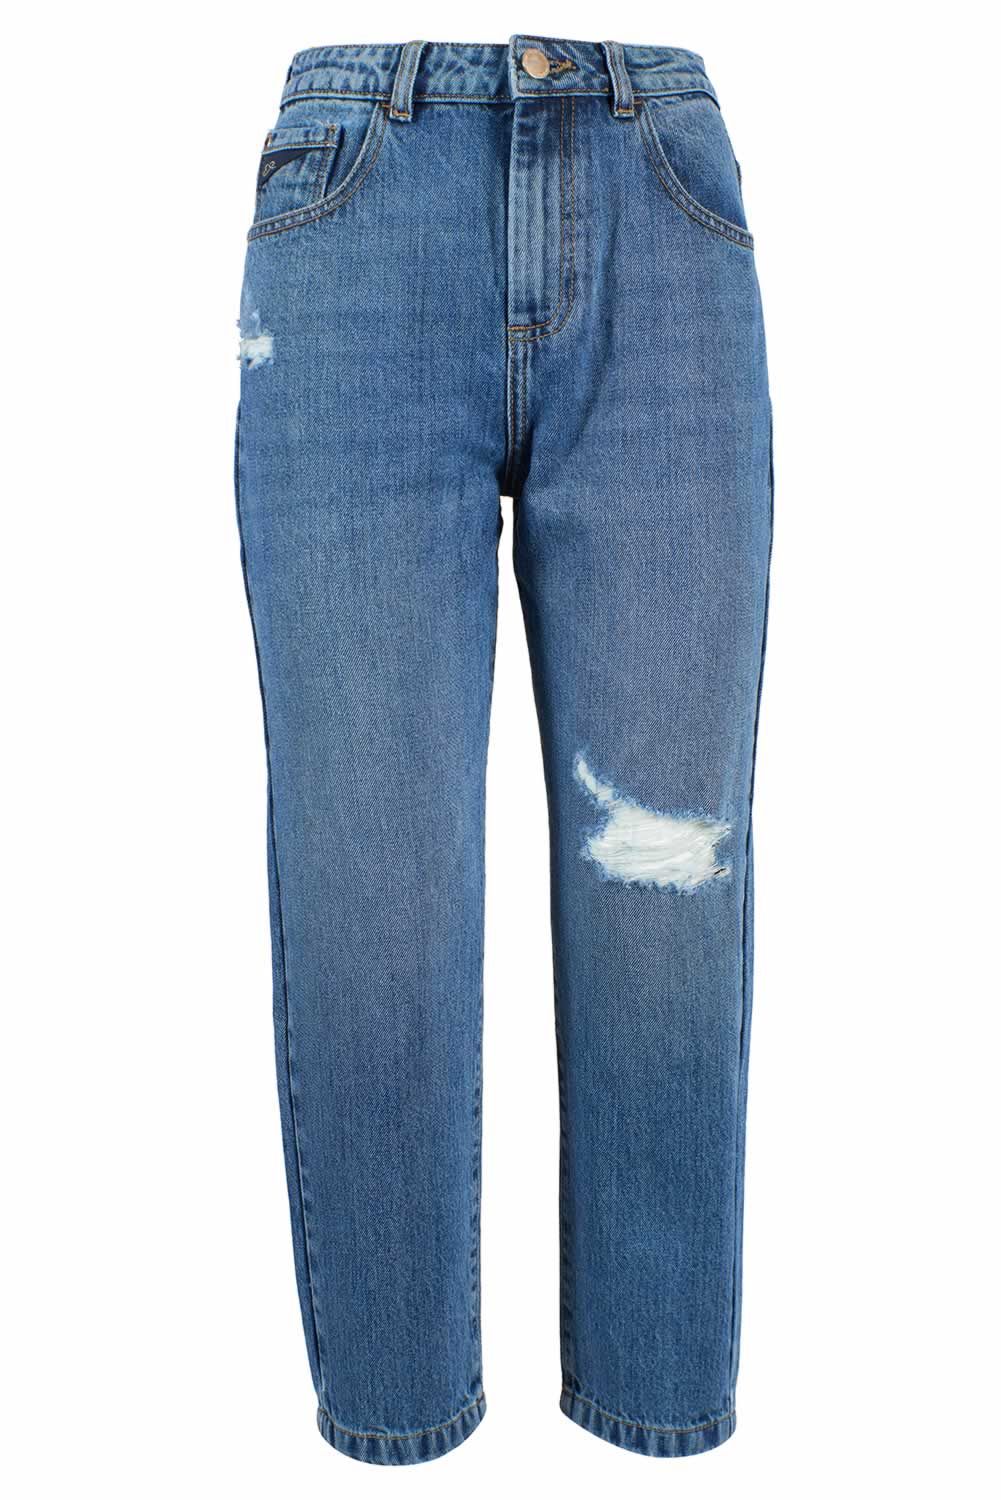 Yes Zee High-Waist Ripped Blue Jeans for Women